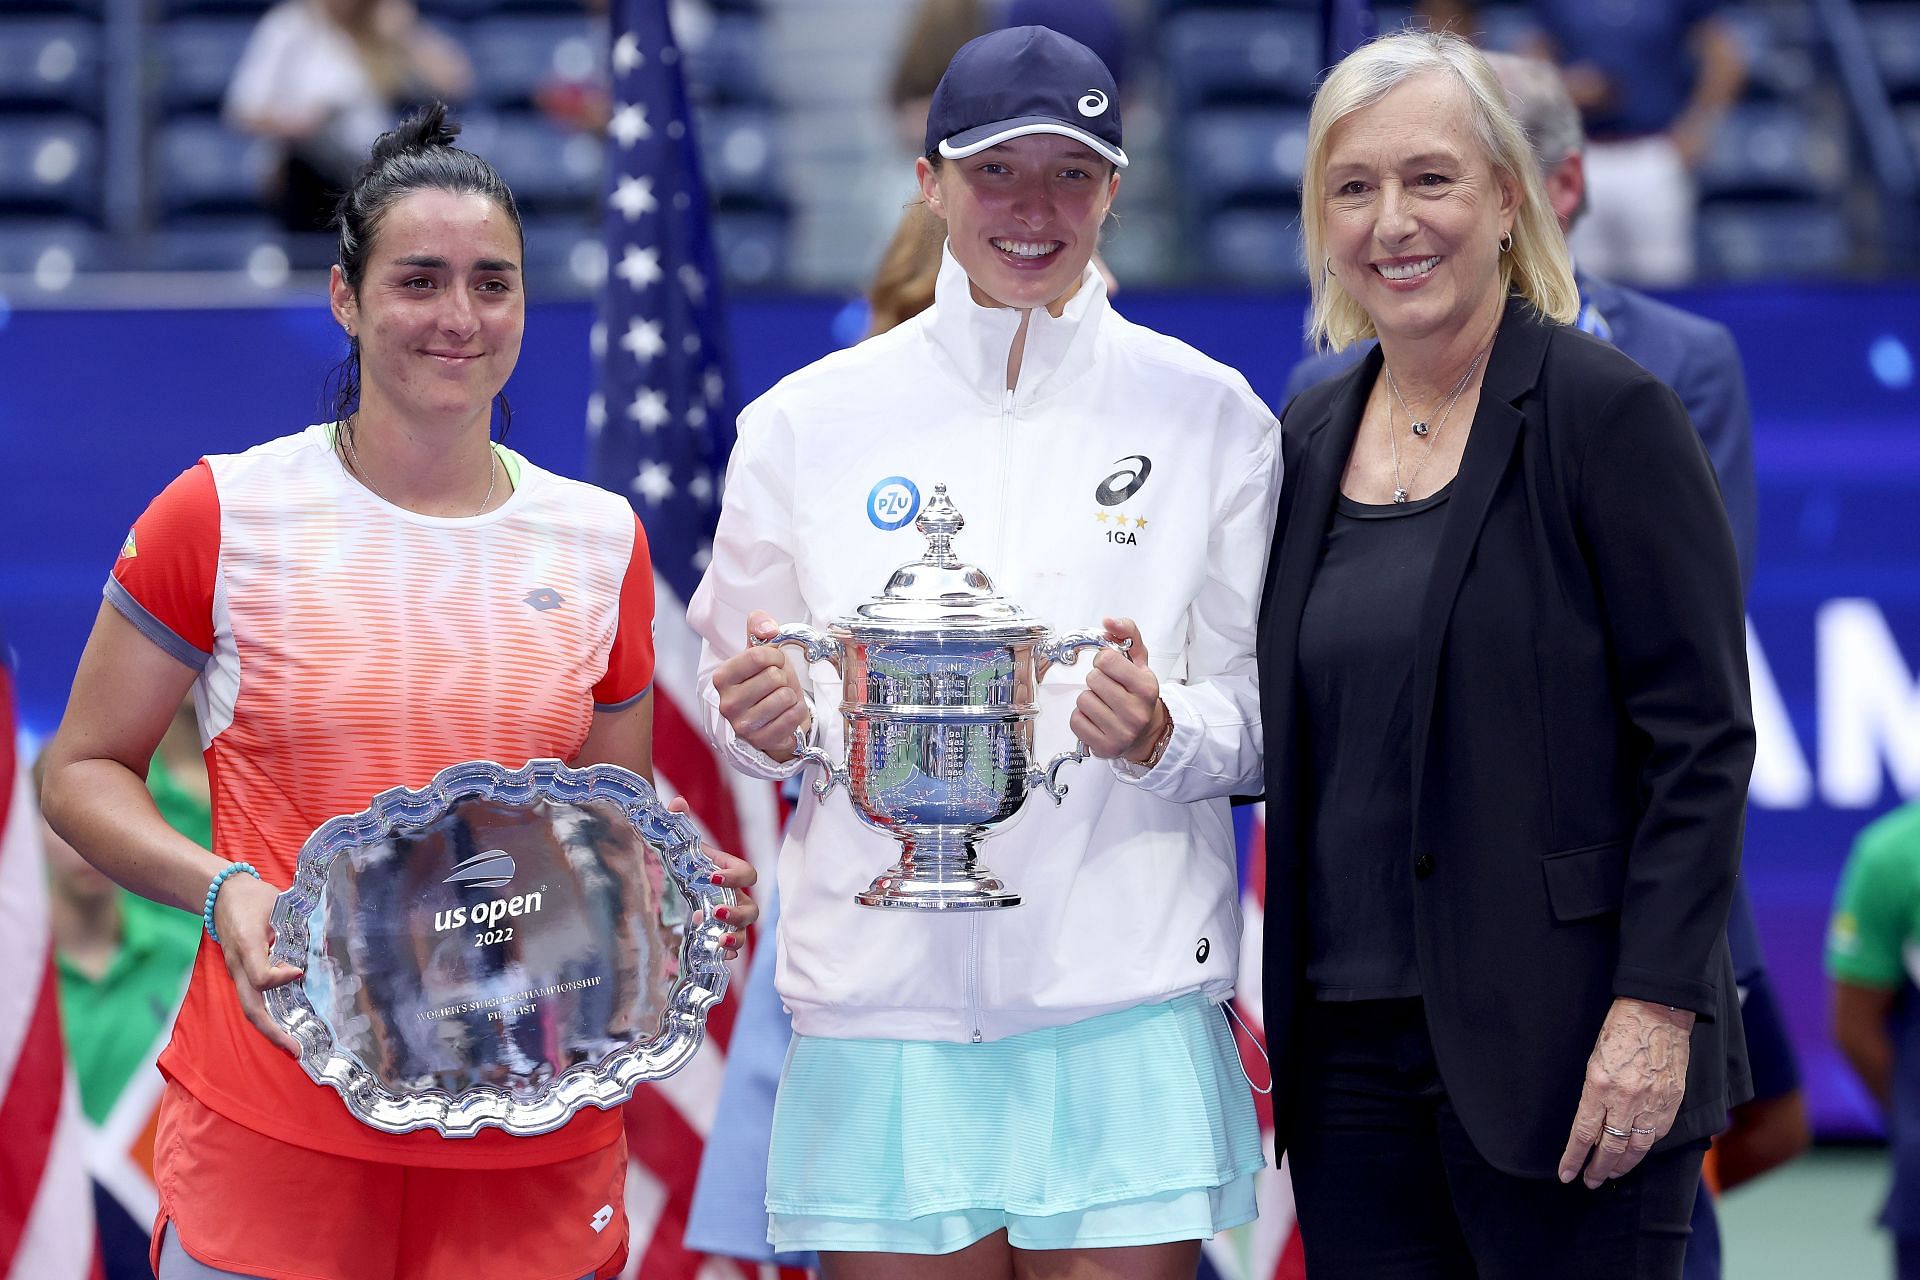 (Right to left) Martina Navratilova, Iga Swiatek, and Ons Jabeur at the 2022 US Open